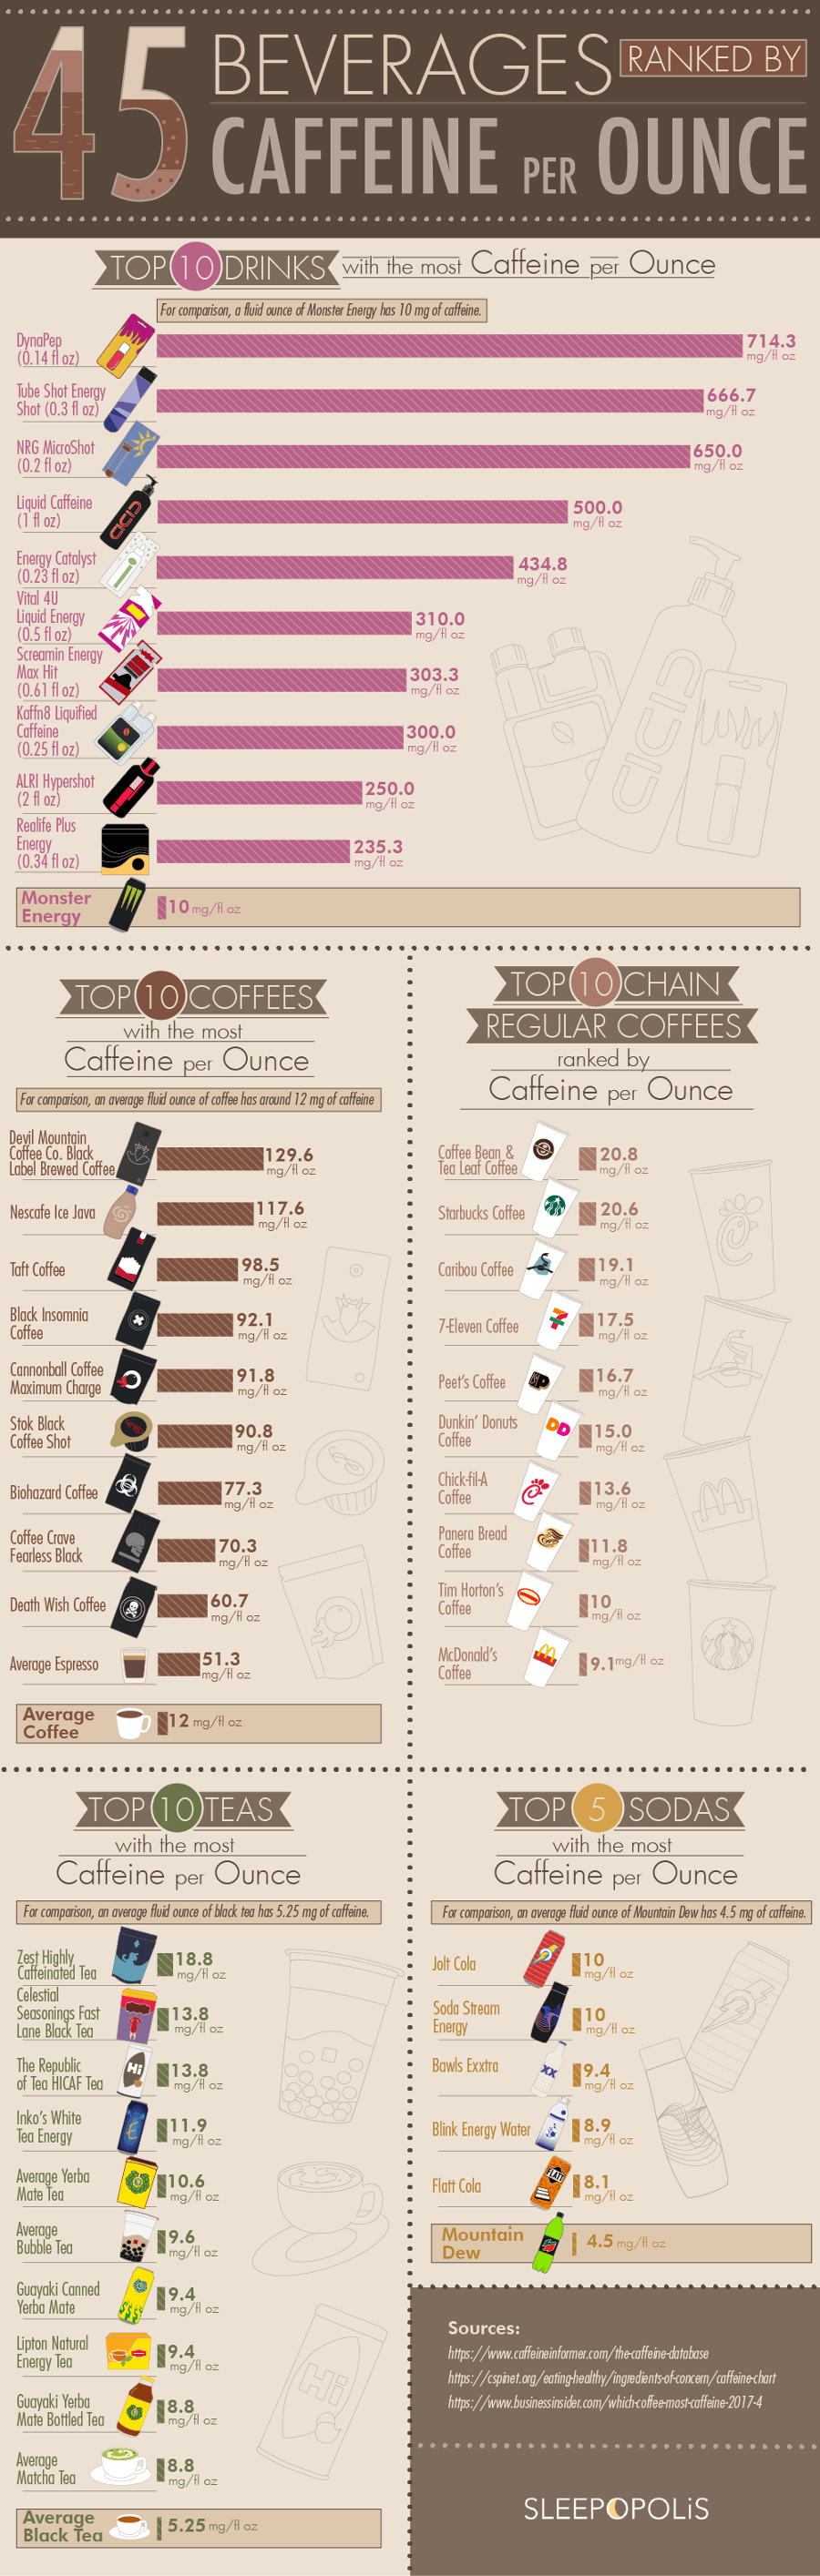 45 beverages ranked by caffeine per ounce 5 90per comp